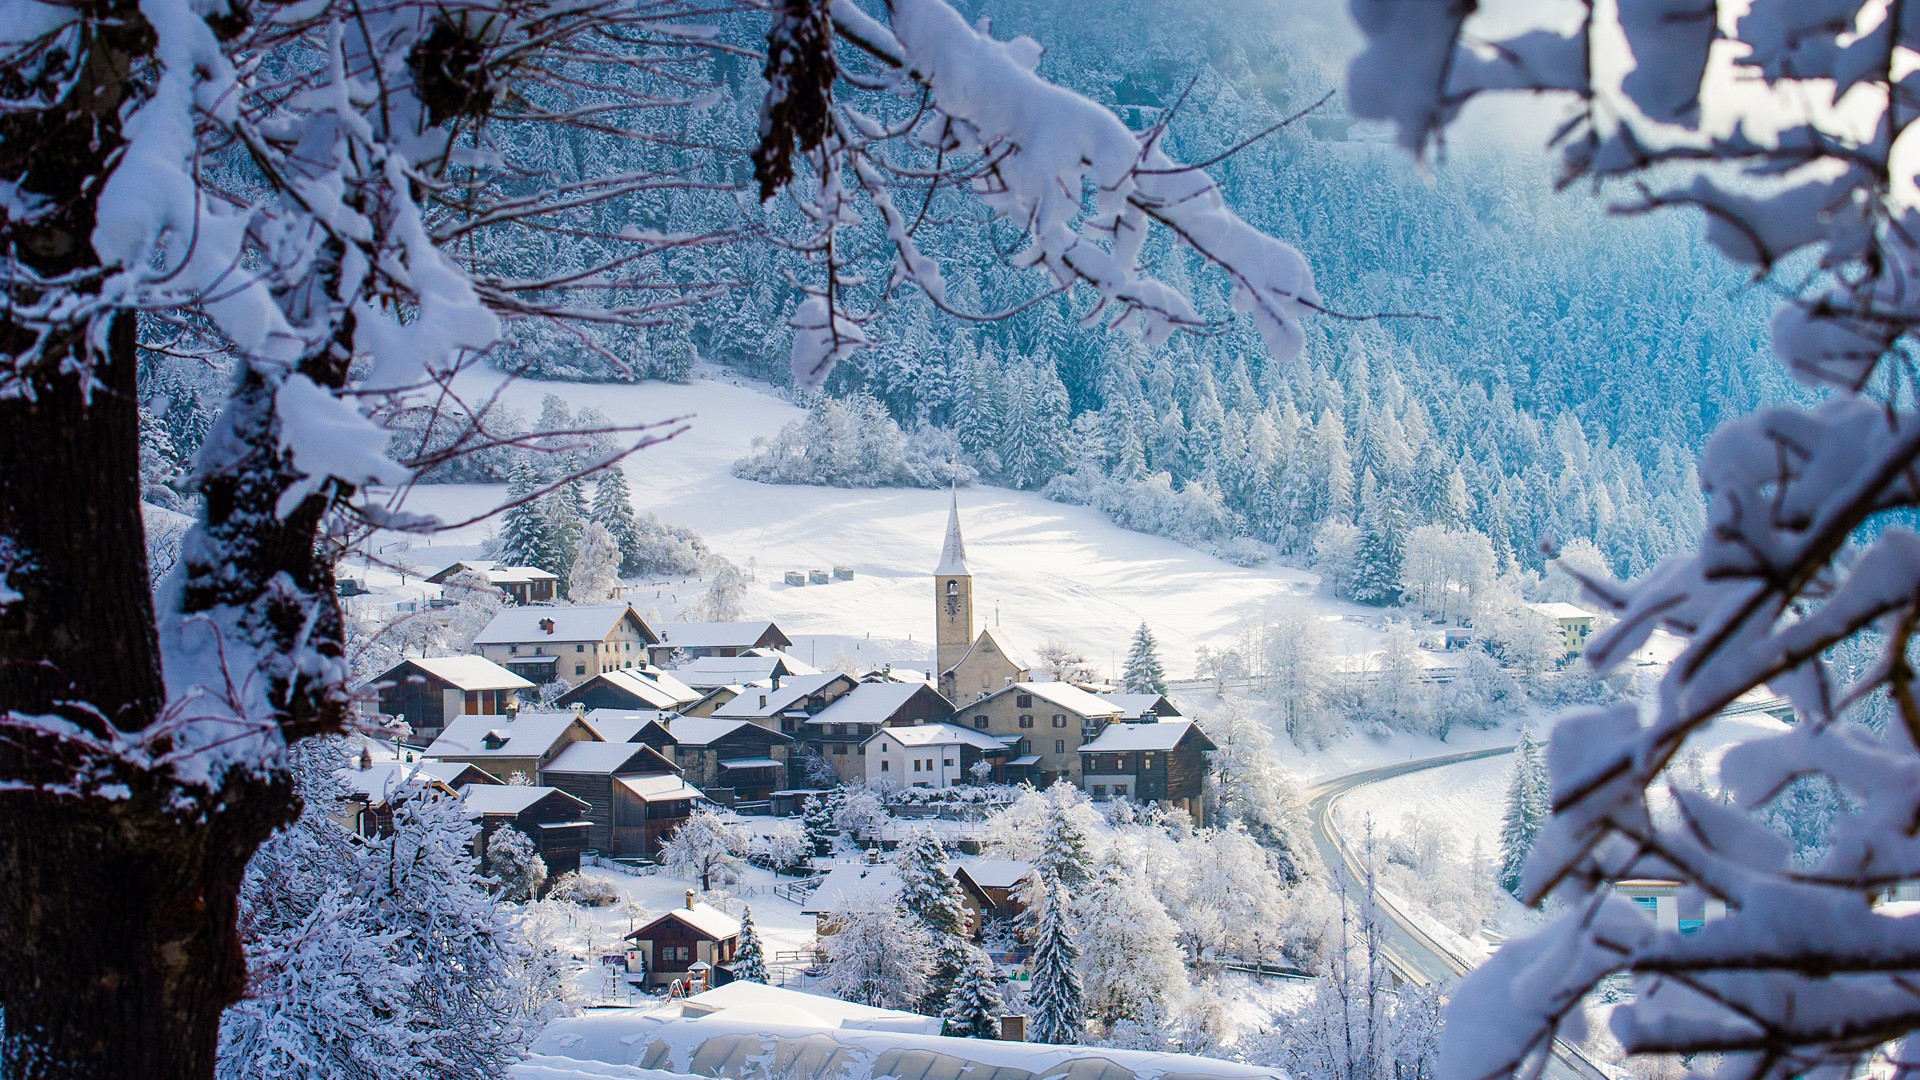 The small town of Filisur with snow in winter, Switzerland. Windows 10 Spotlight Image